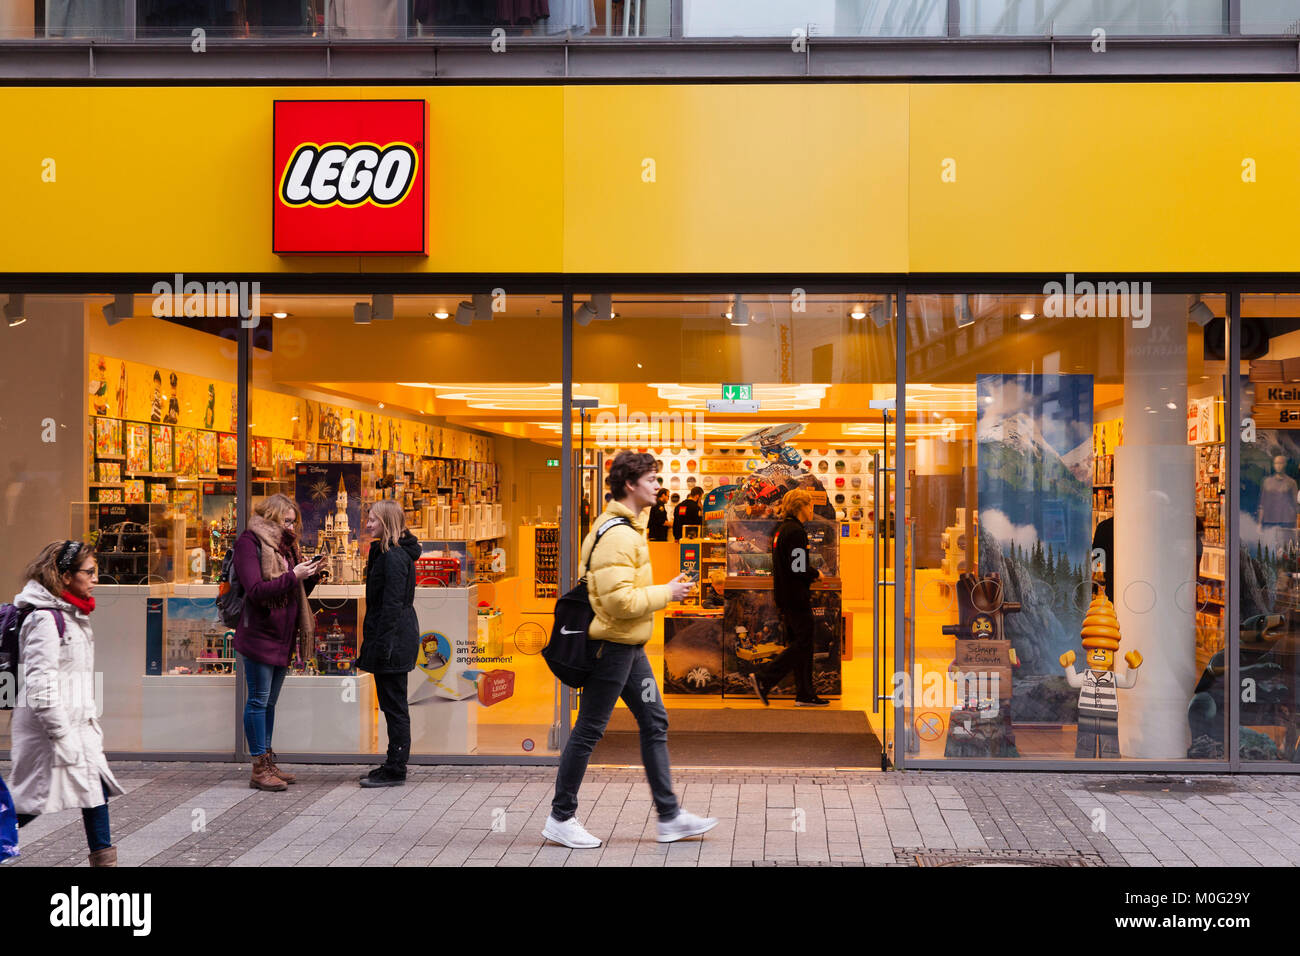 Europe, Germany, Cologne, Lego store at the shopping street Hohe Strasse, toy store.  Europa, Deutschland, Koeln, Lego Filiale in der Fussgaengerzone  Stock Photo